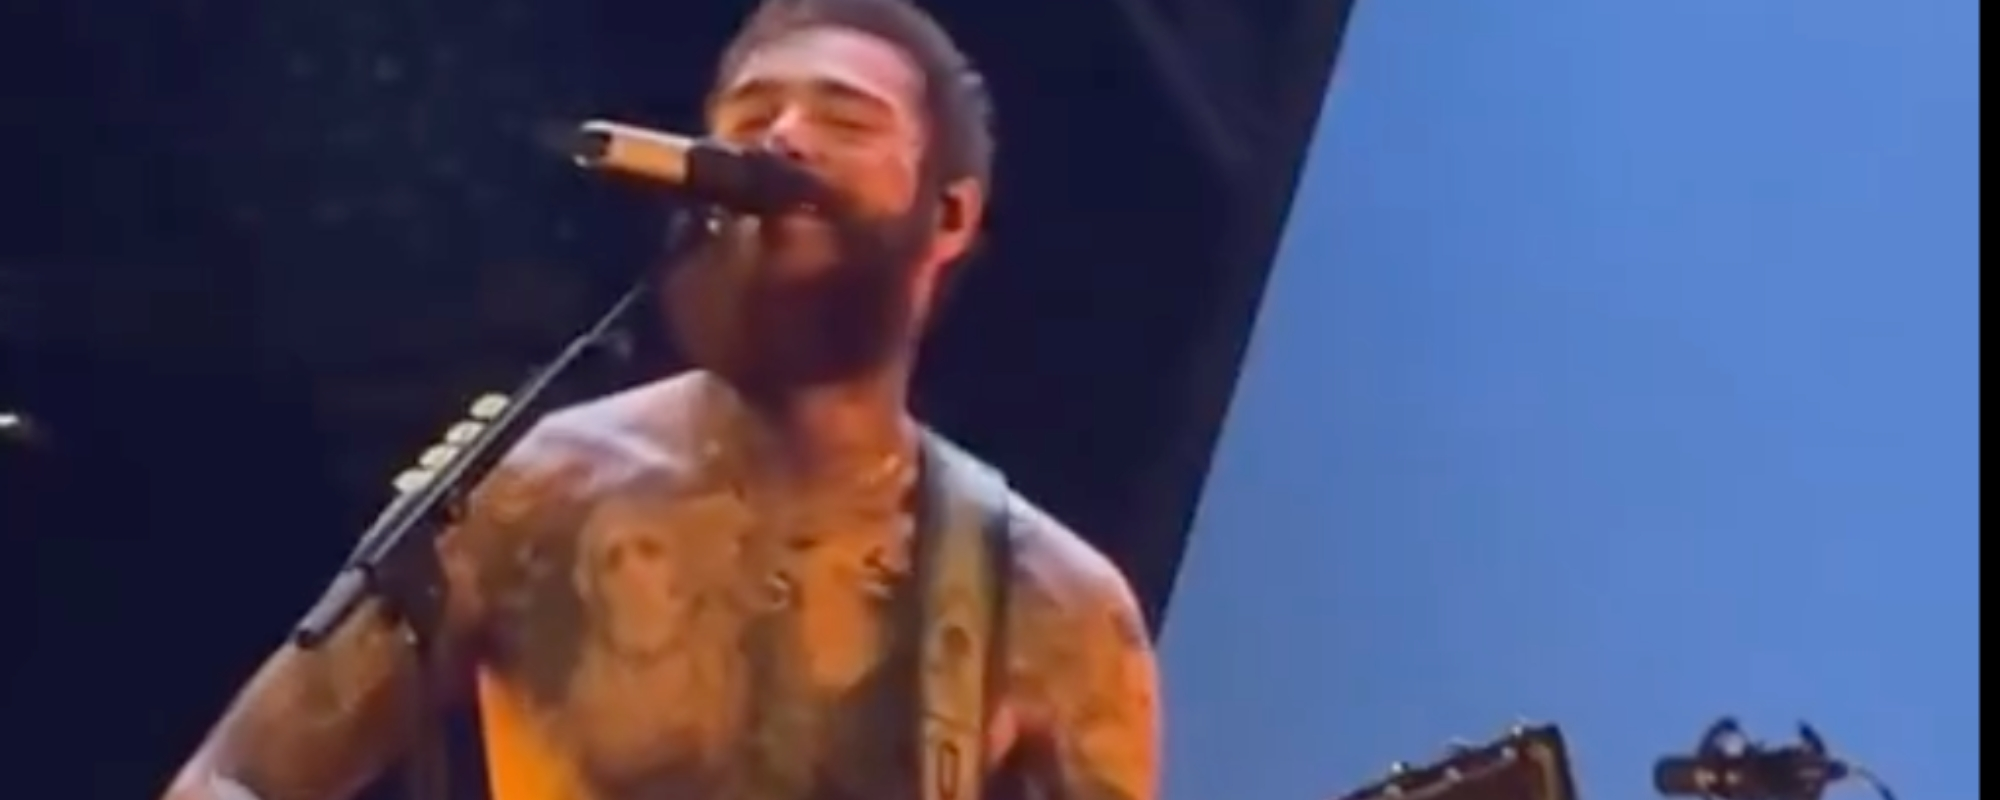 Post Malone Commemorates Toby Keith With Rousing Rendition of “As Good as I Once Was”